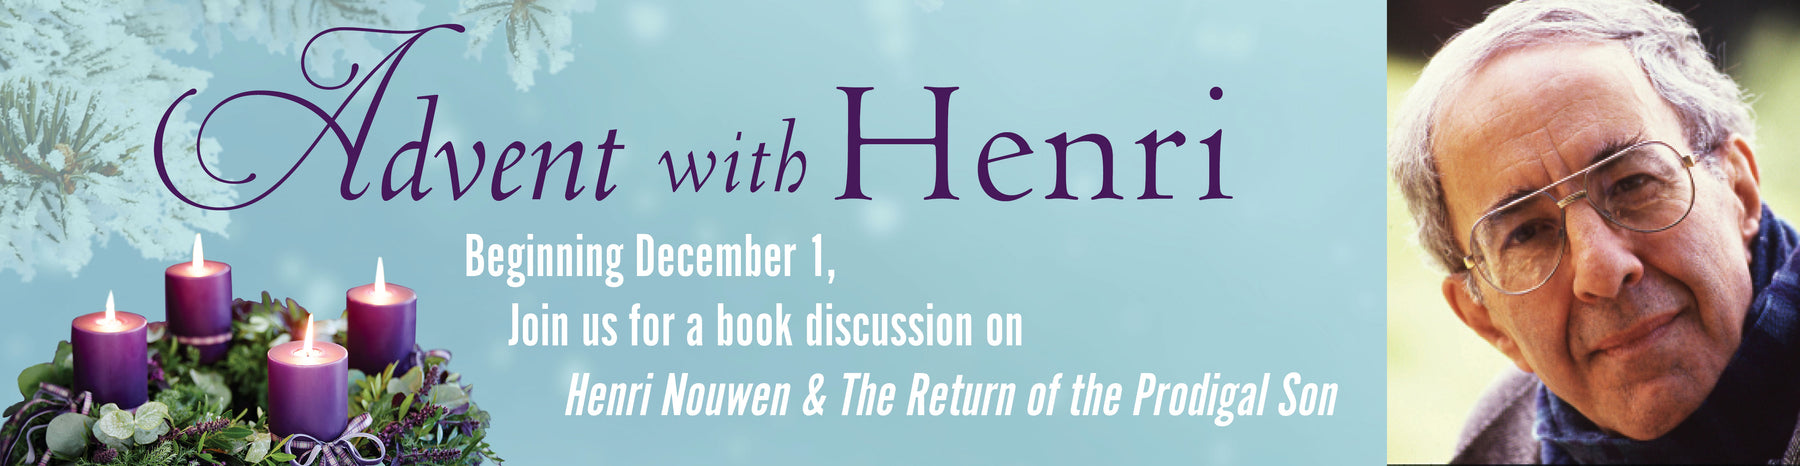 Week 1 - Advent with Henri